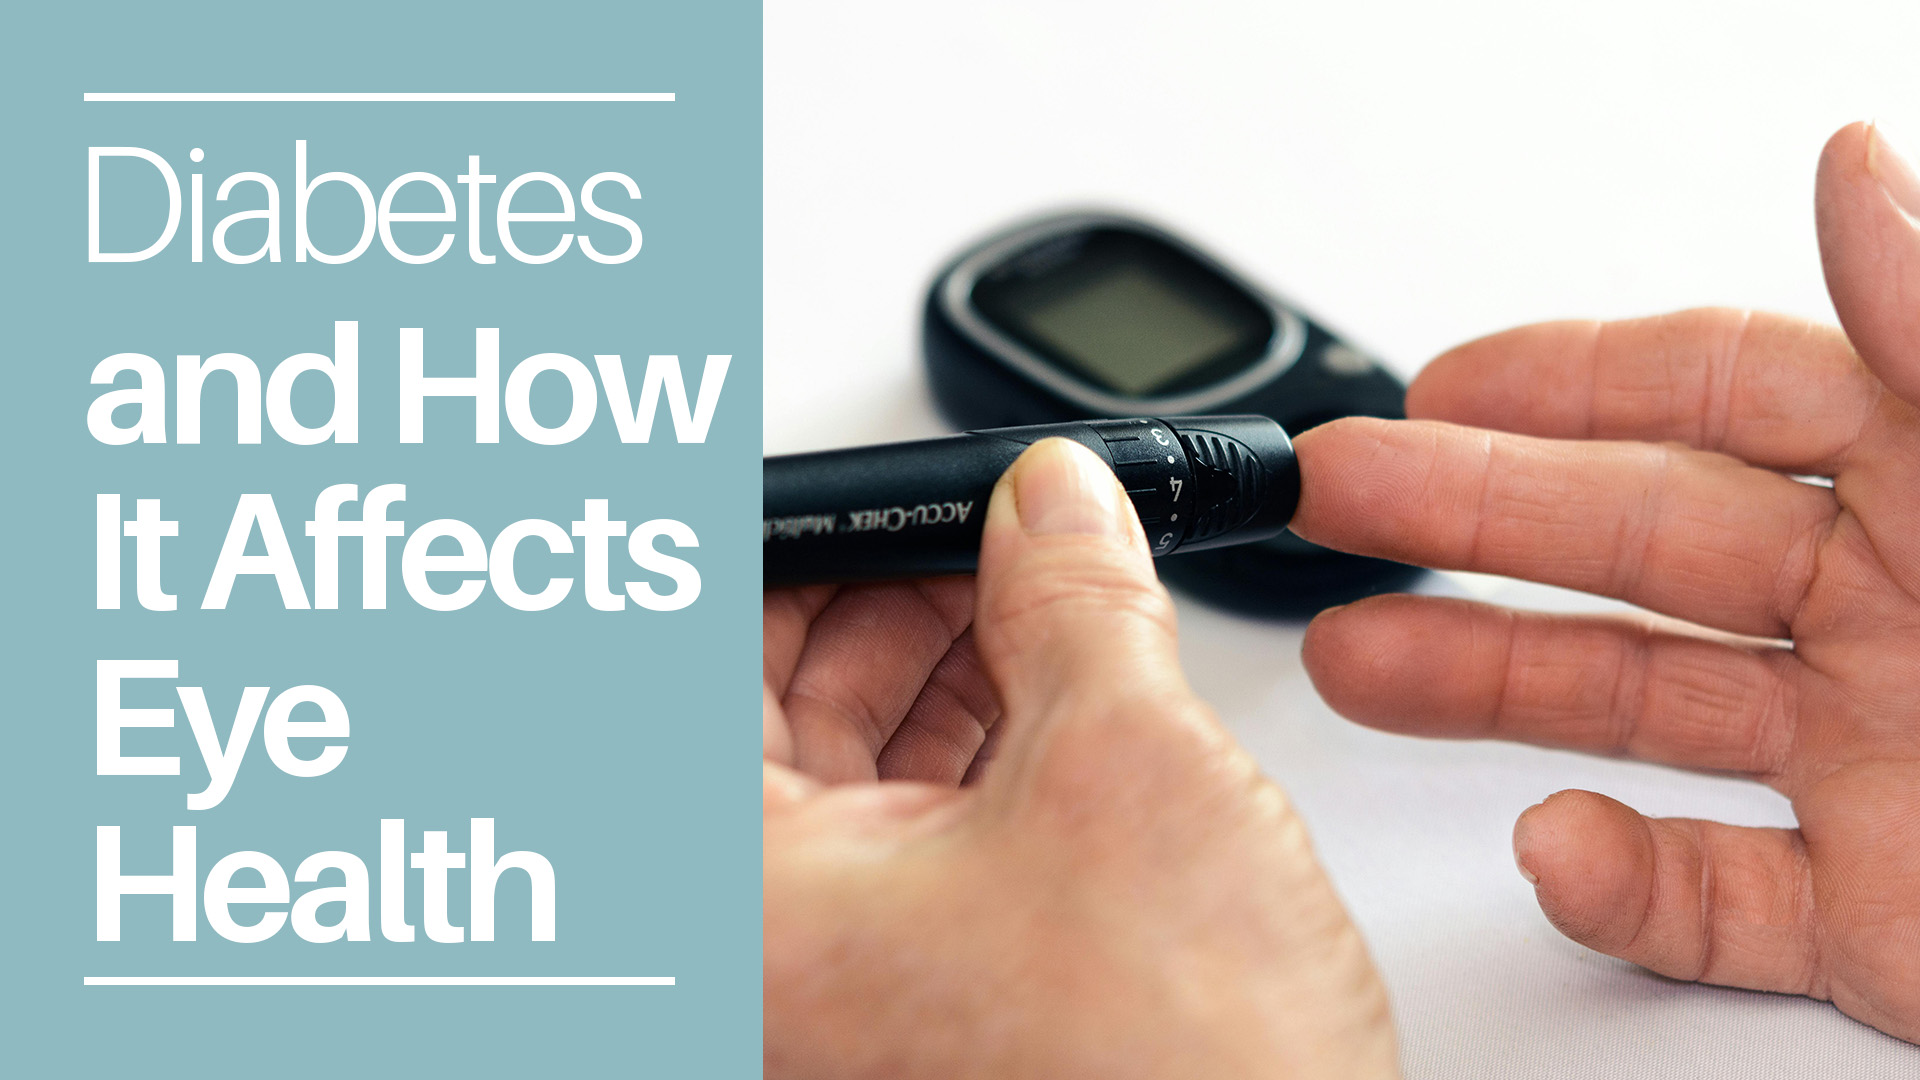 Diabetes and How It Affects Eye Health